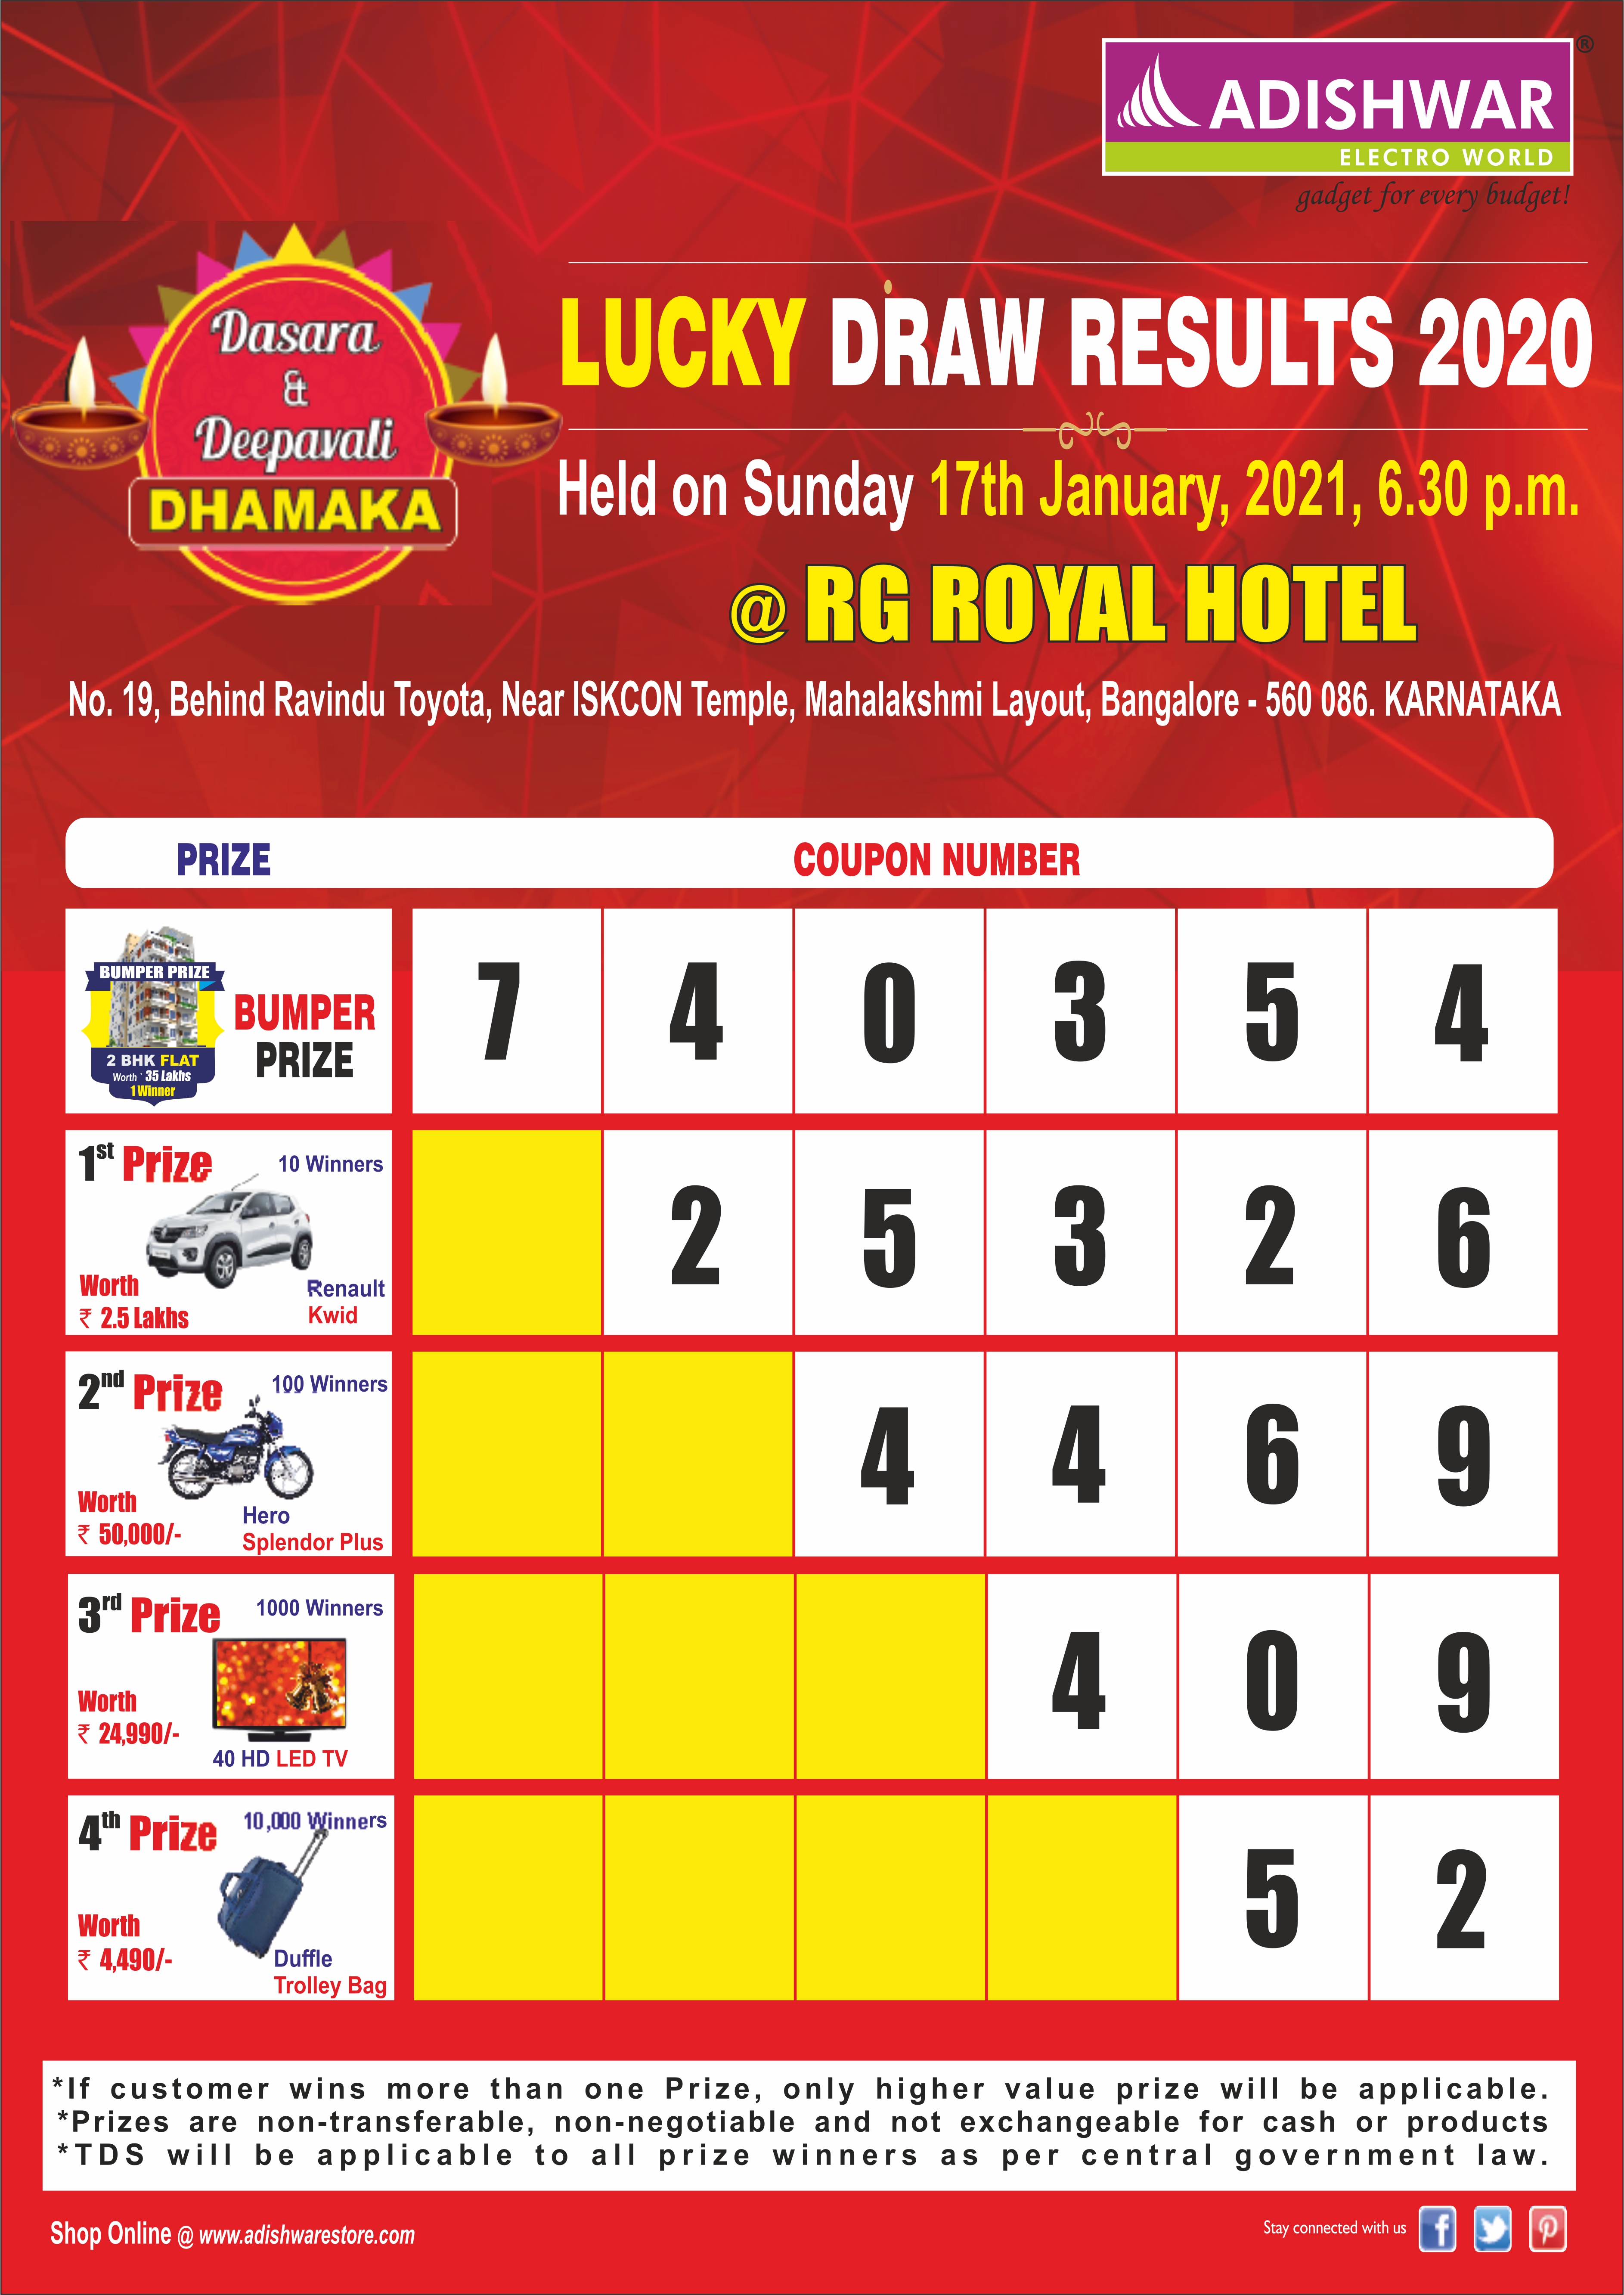 LUCKY DRAW RESULTS 2020